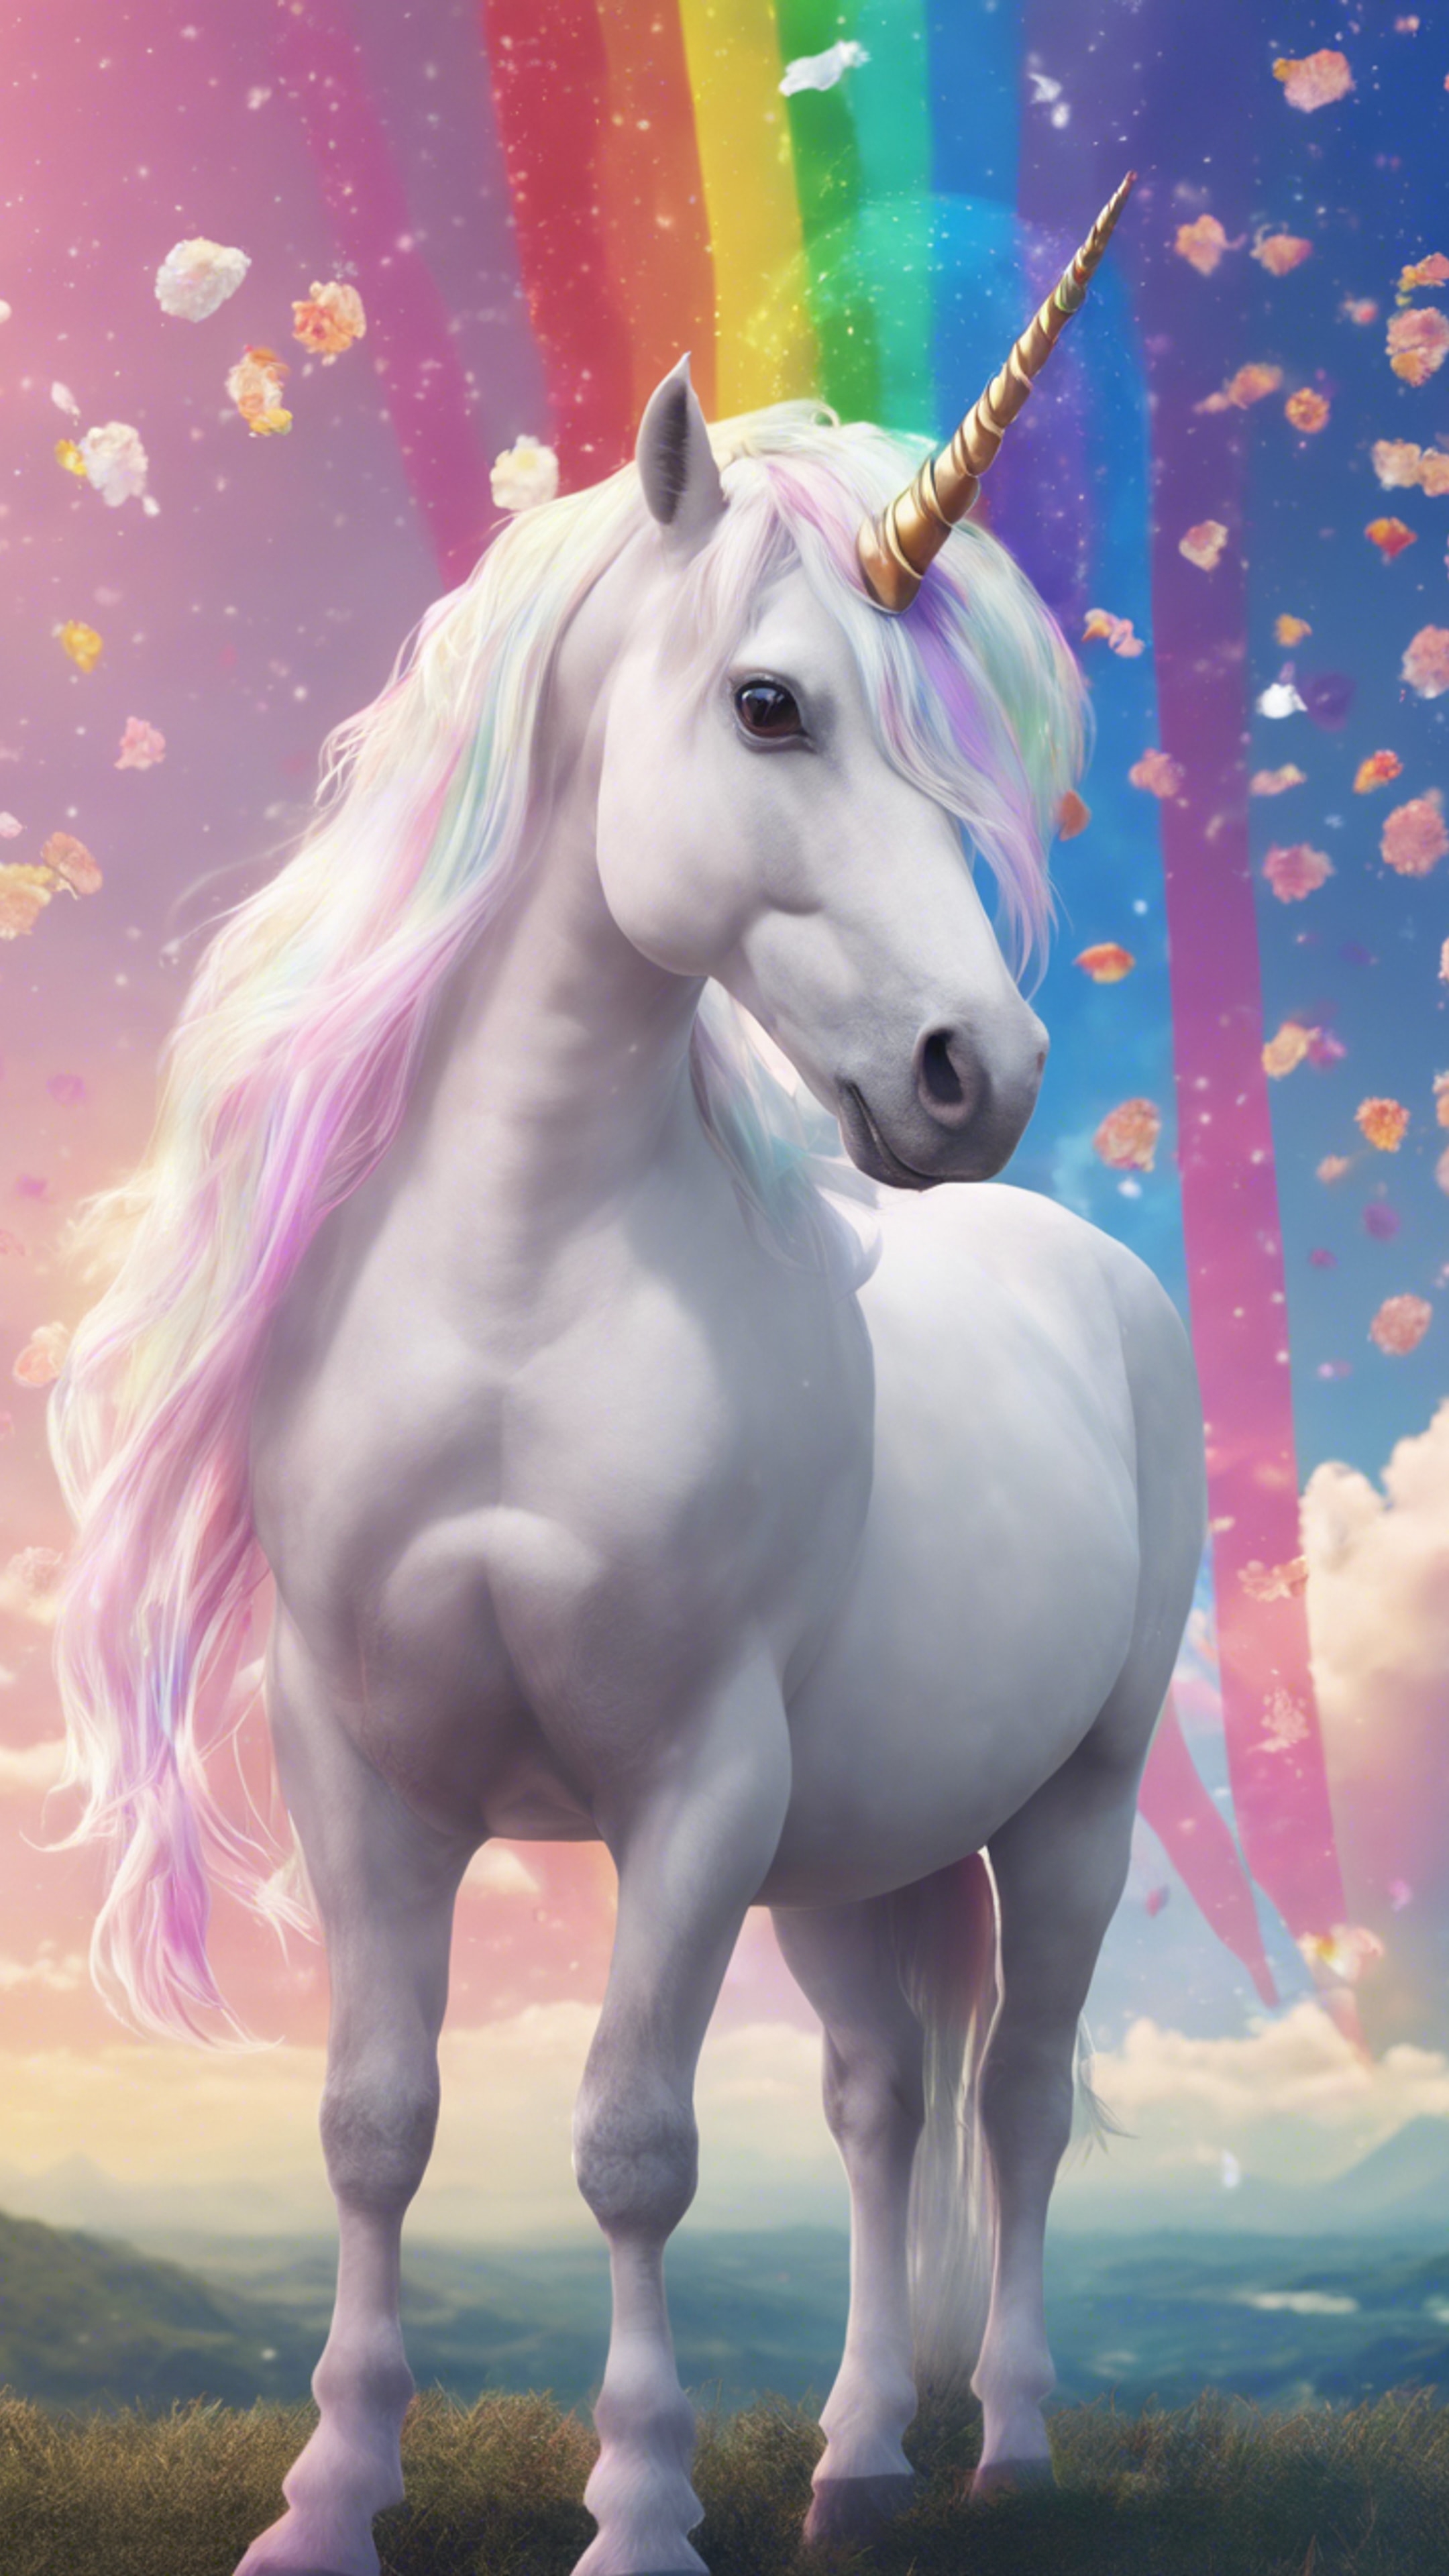 A white unicorn with rainbow-colored mane in a kawaii styled anime background. Papel de parede[3fcd035c52a54abd9a77]